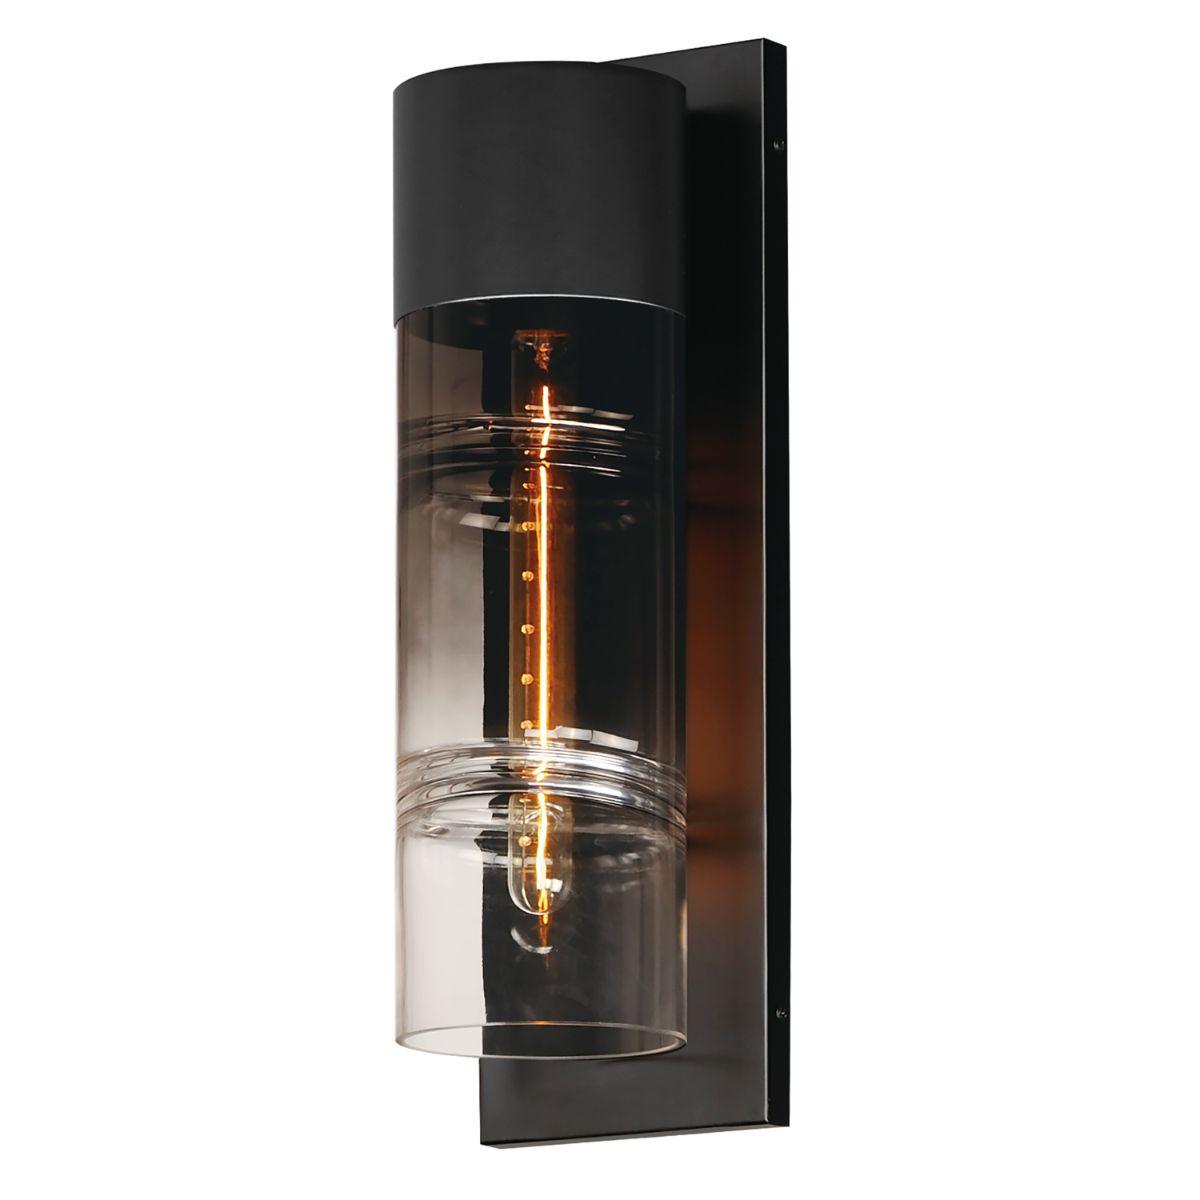 Smokestack 20 in. LED Outdoor Wall Sconce Black Finish